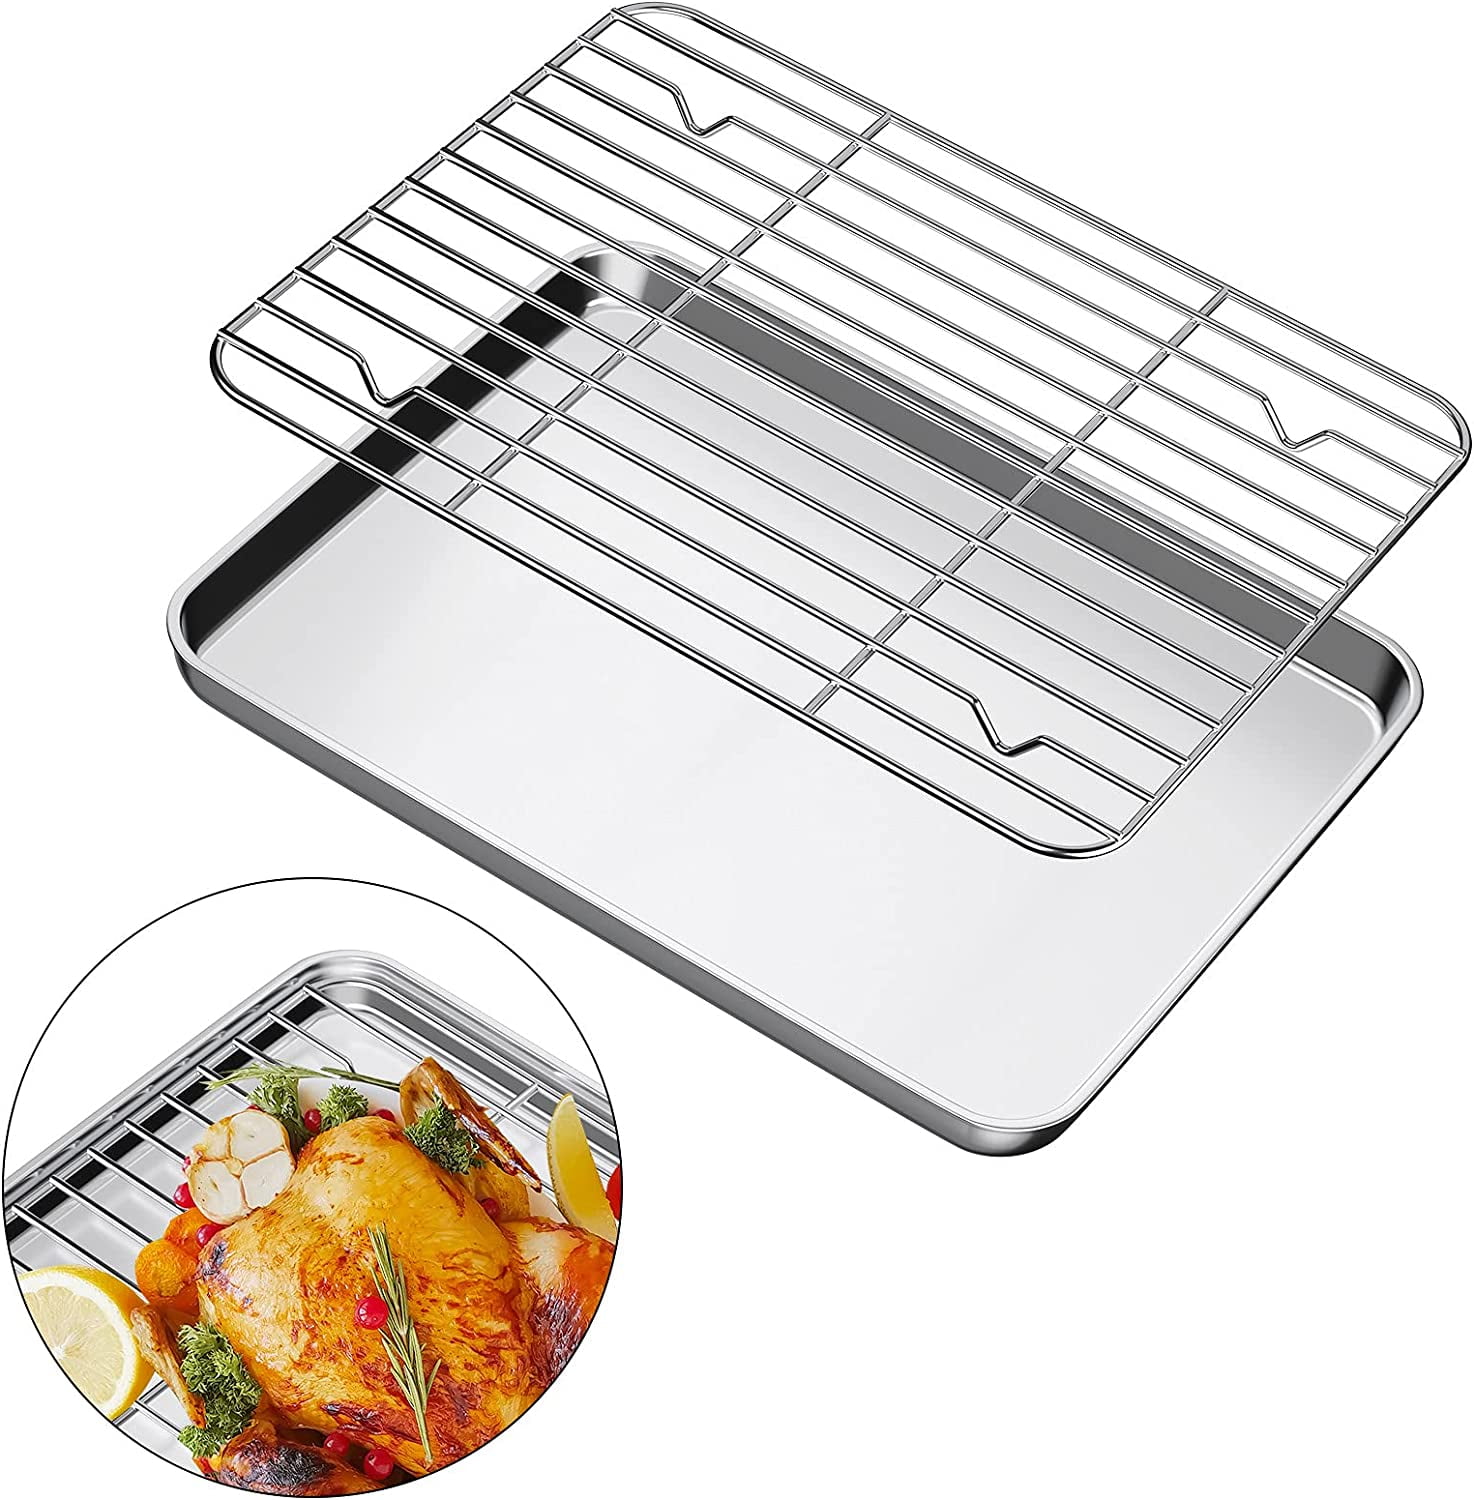 Baking Tray with Rack Set, Stainless Steel Baking Sheet with Cooling Rack  15.7 x 11.8, Easy Clean & Dishwasher Safe, Oven Trays for Bread/  Biscuits/ Meat Cooking Suitable for Thanksgiving,Christmas 